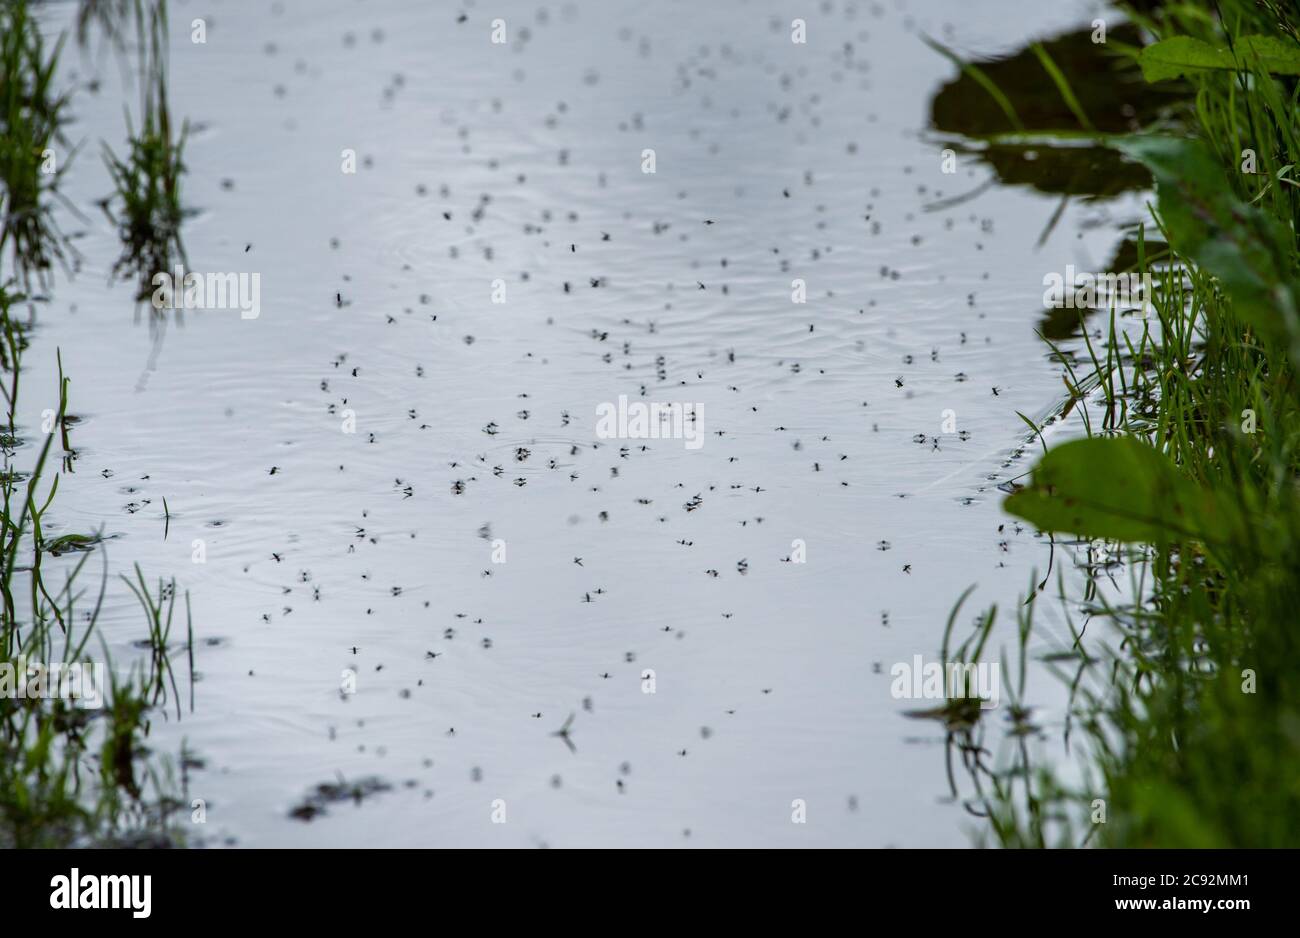 Midges hatching and flying in a puddle, Chipping, Preston, Lancashire, UK Stock Photo